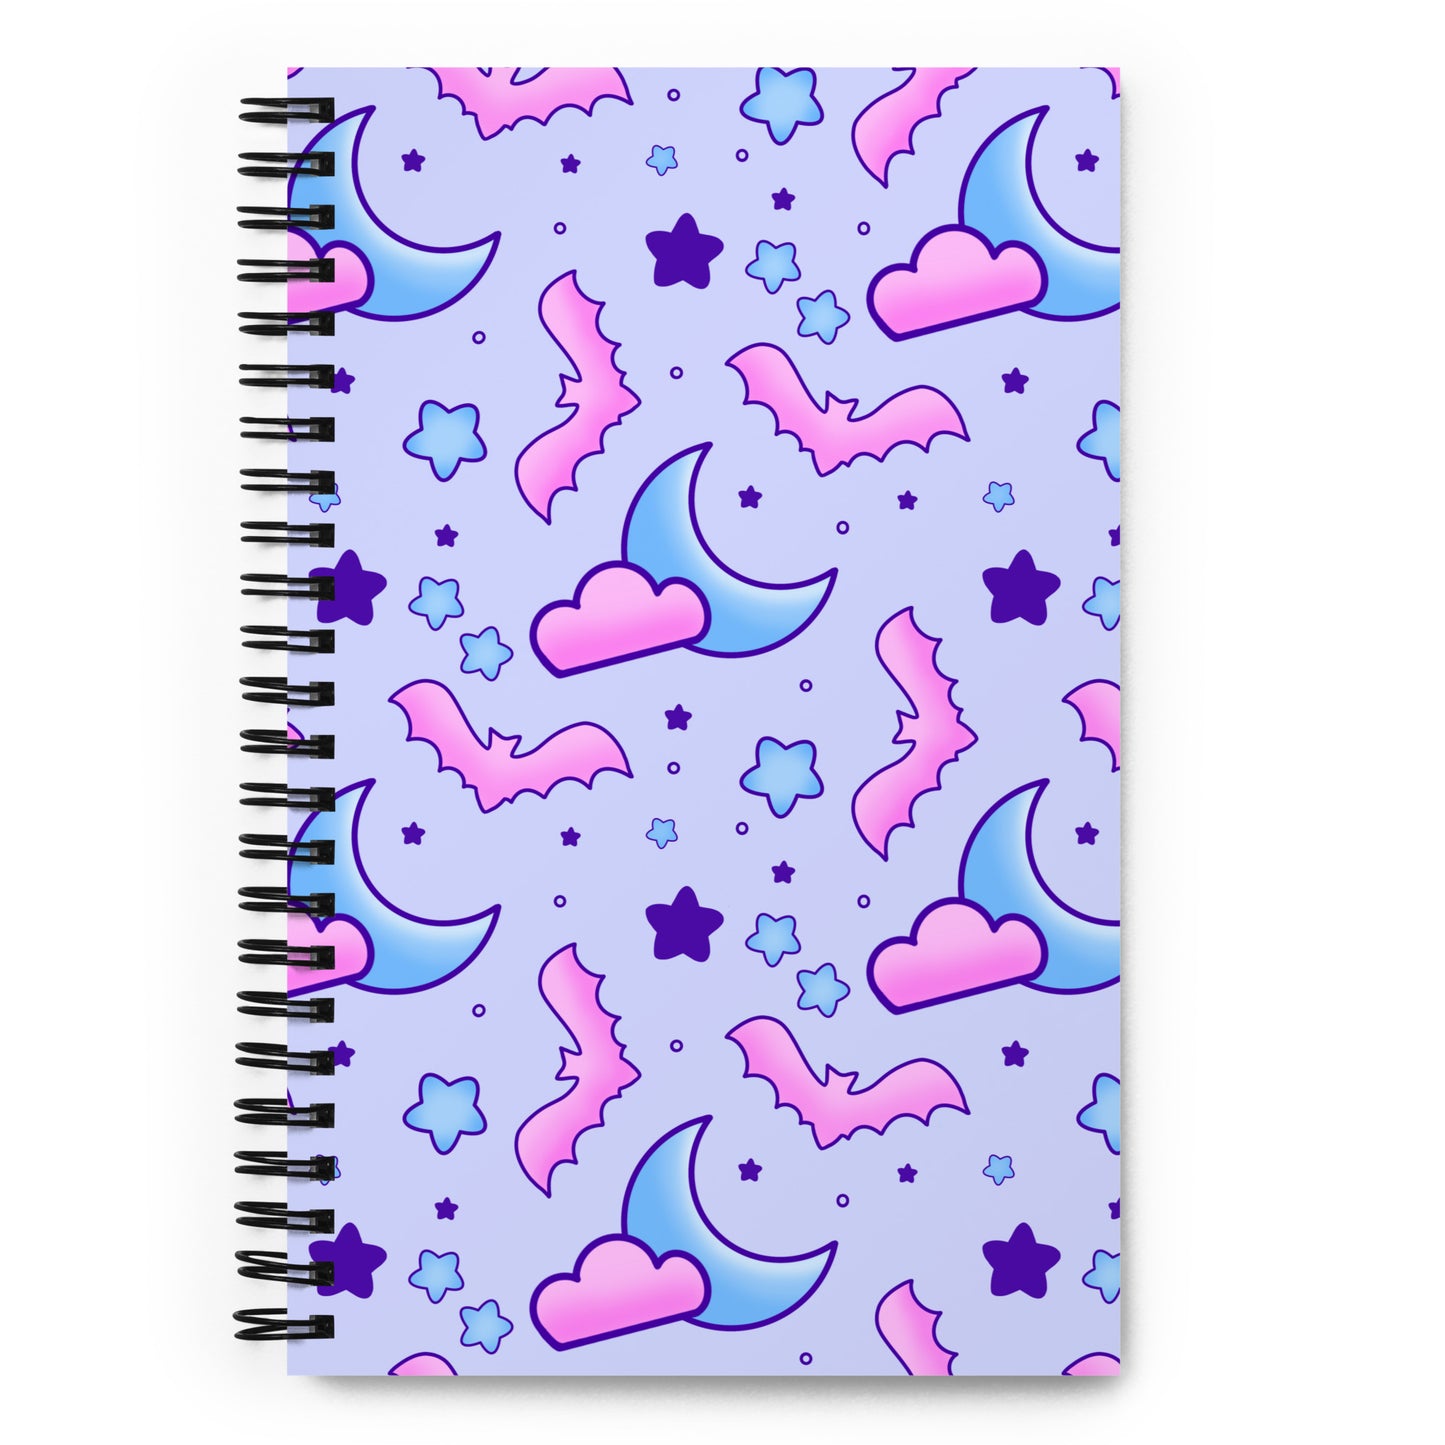 spiral bound, dot-grid, notebook with pink bats, pink clouds, blue moons, and stars